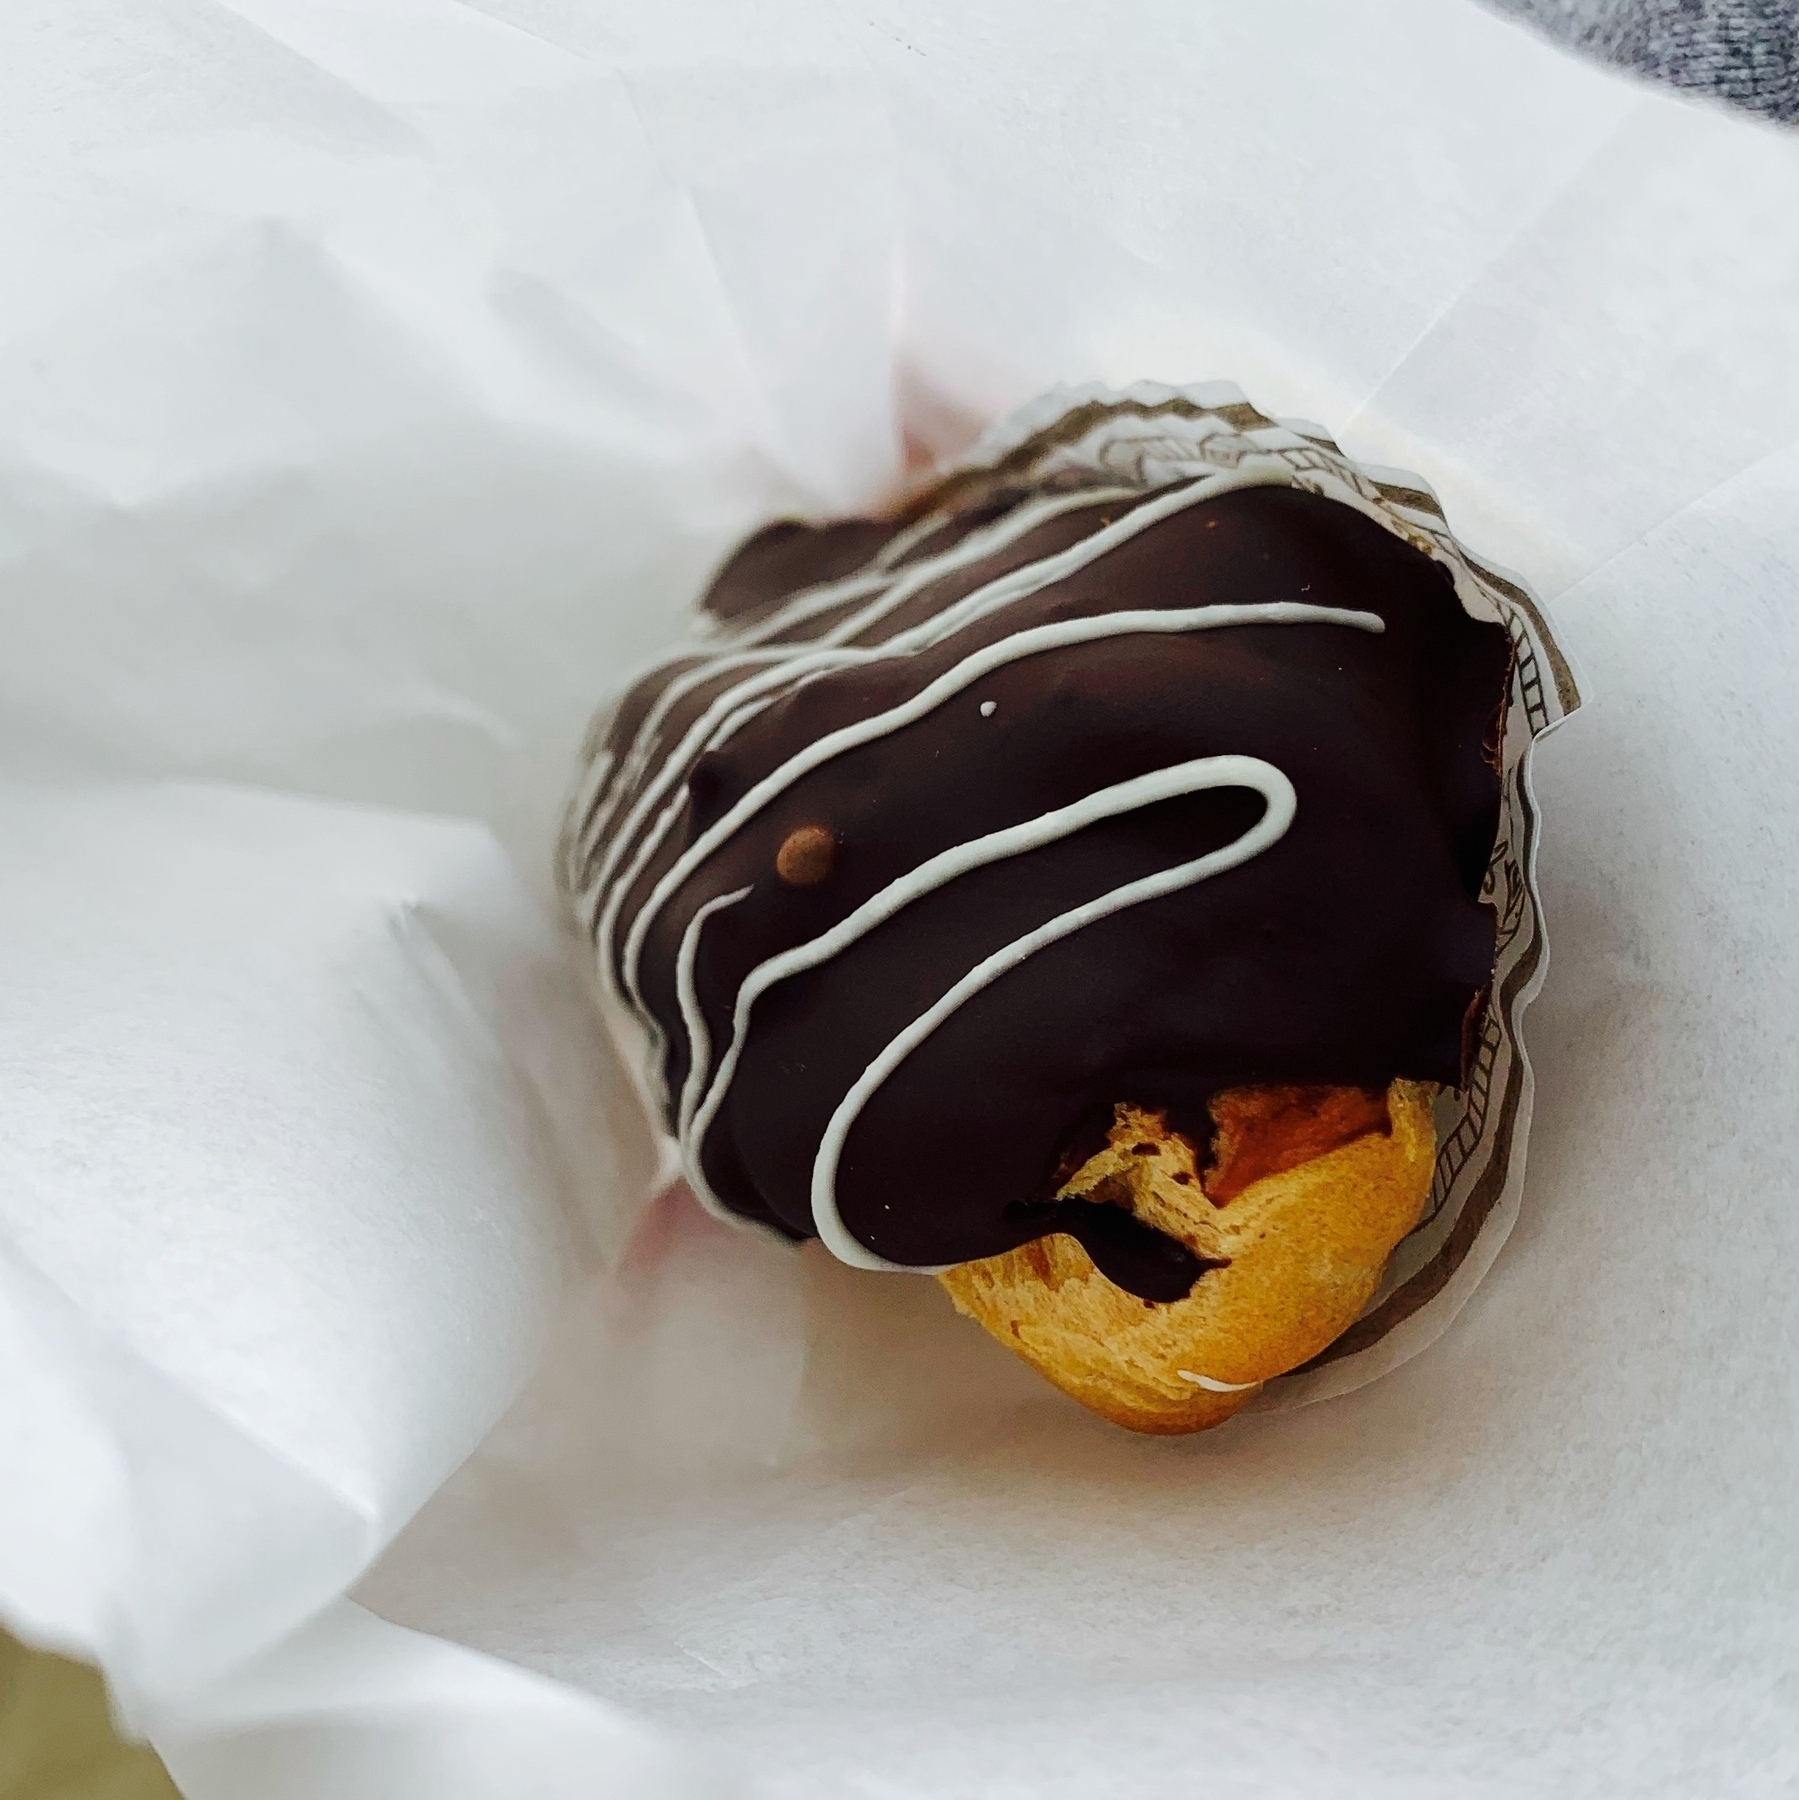 a chocolate covered eclair, end on